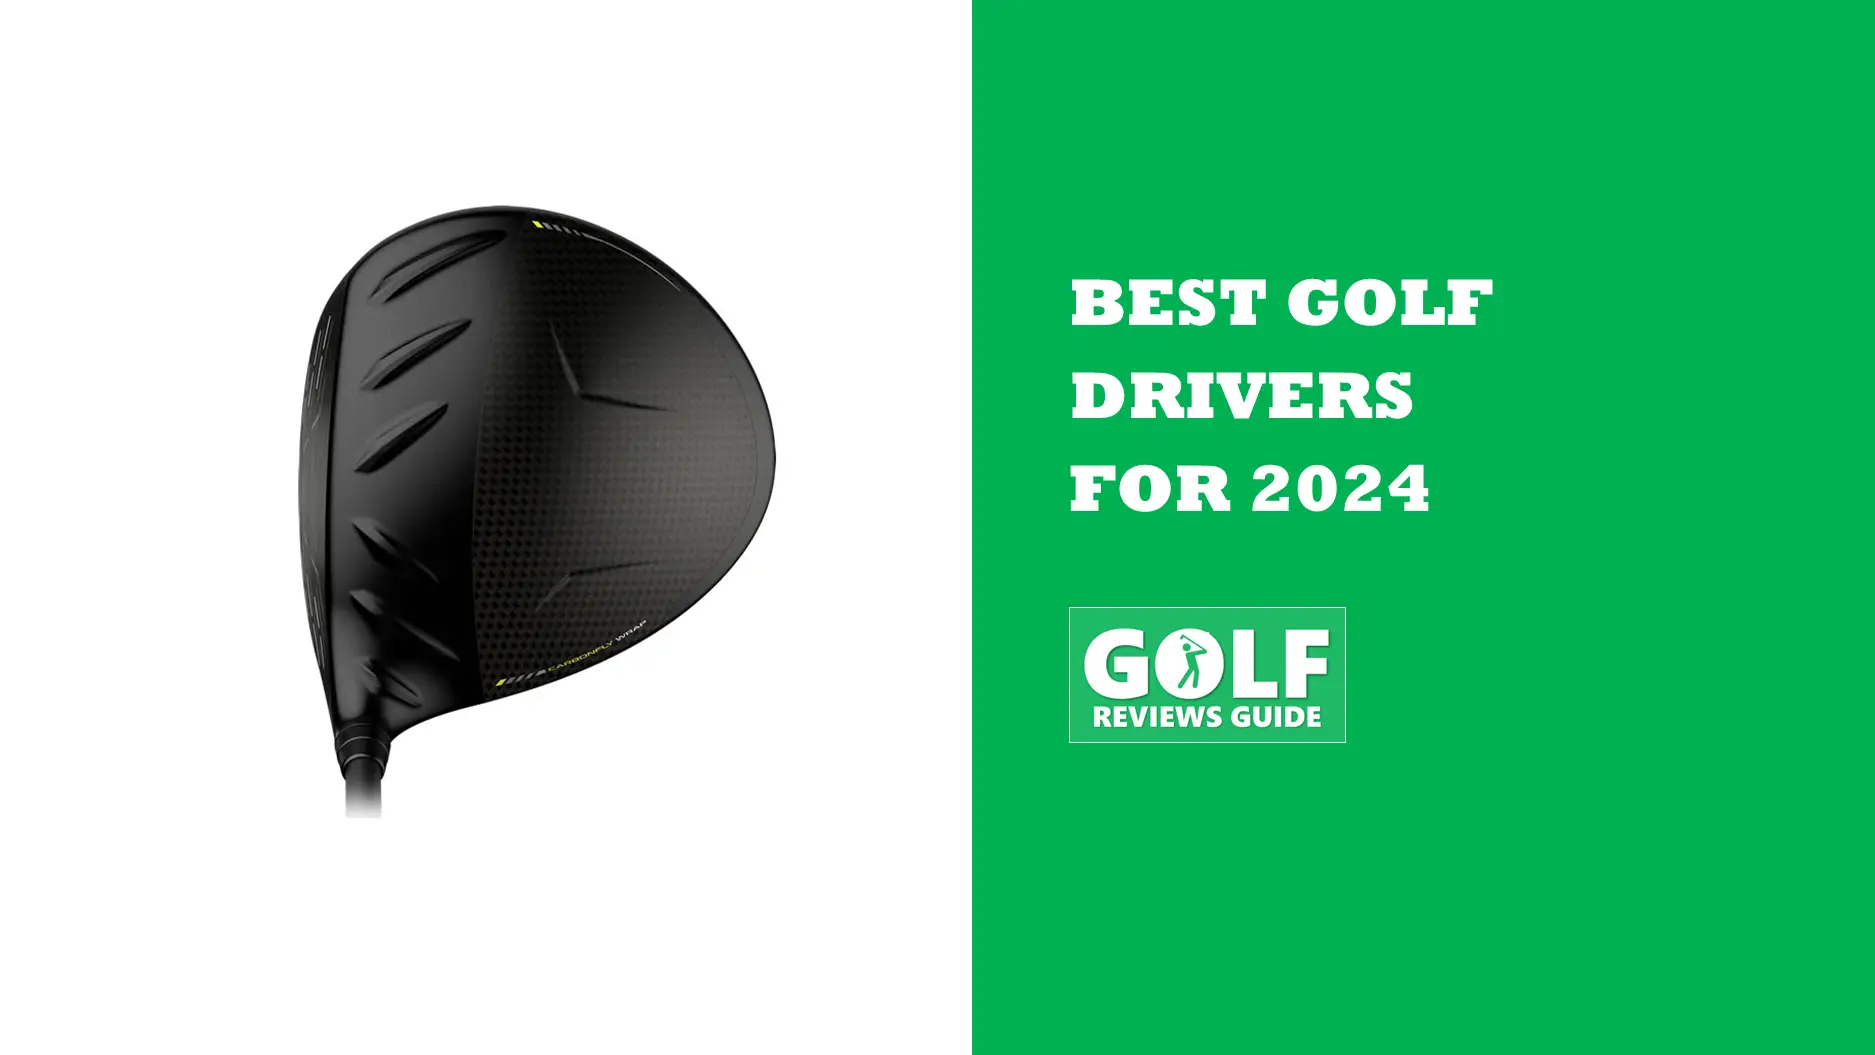 Best Golf Drivers 2024 (TOP Ranked Drivers for 2024)